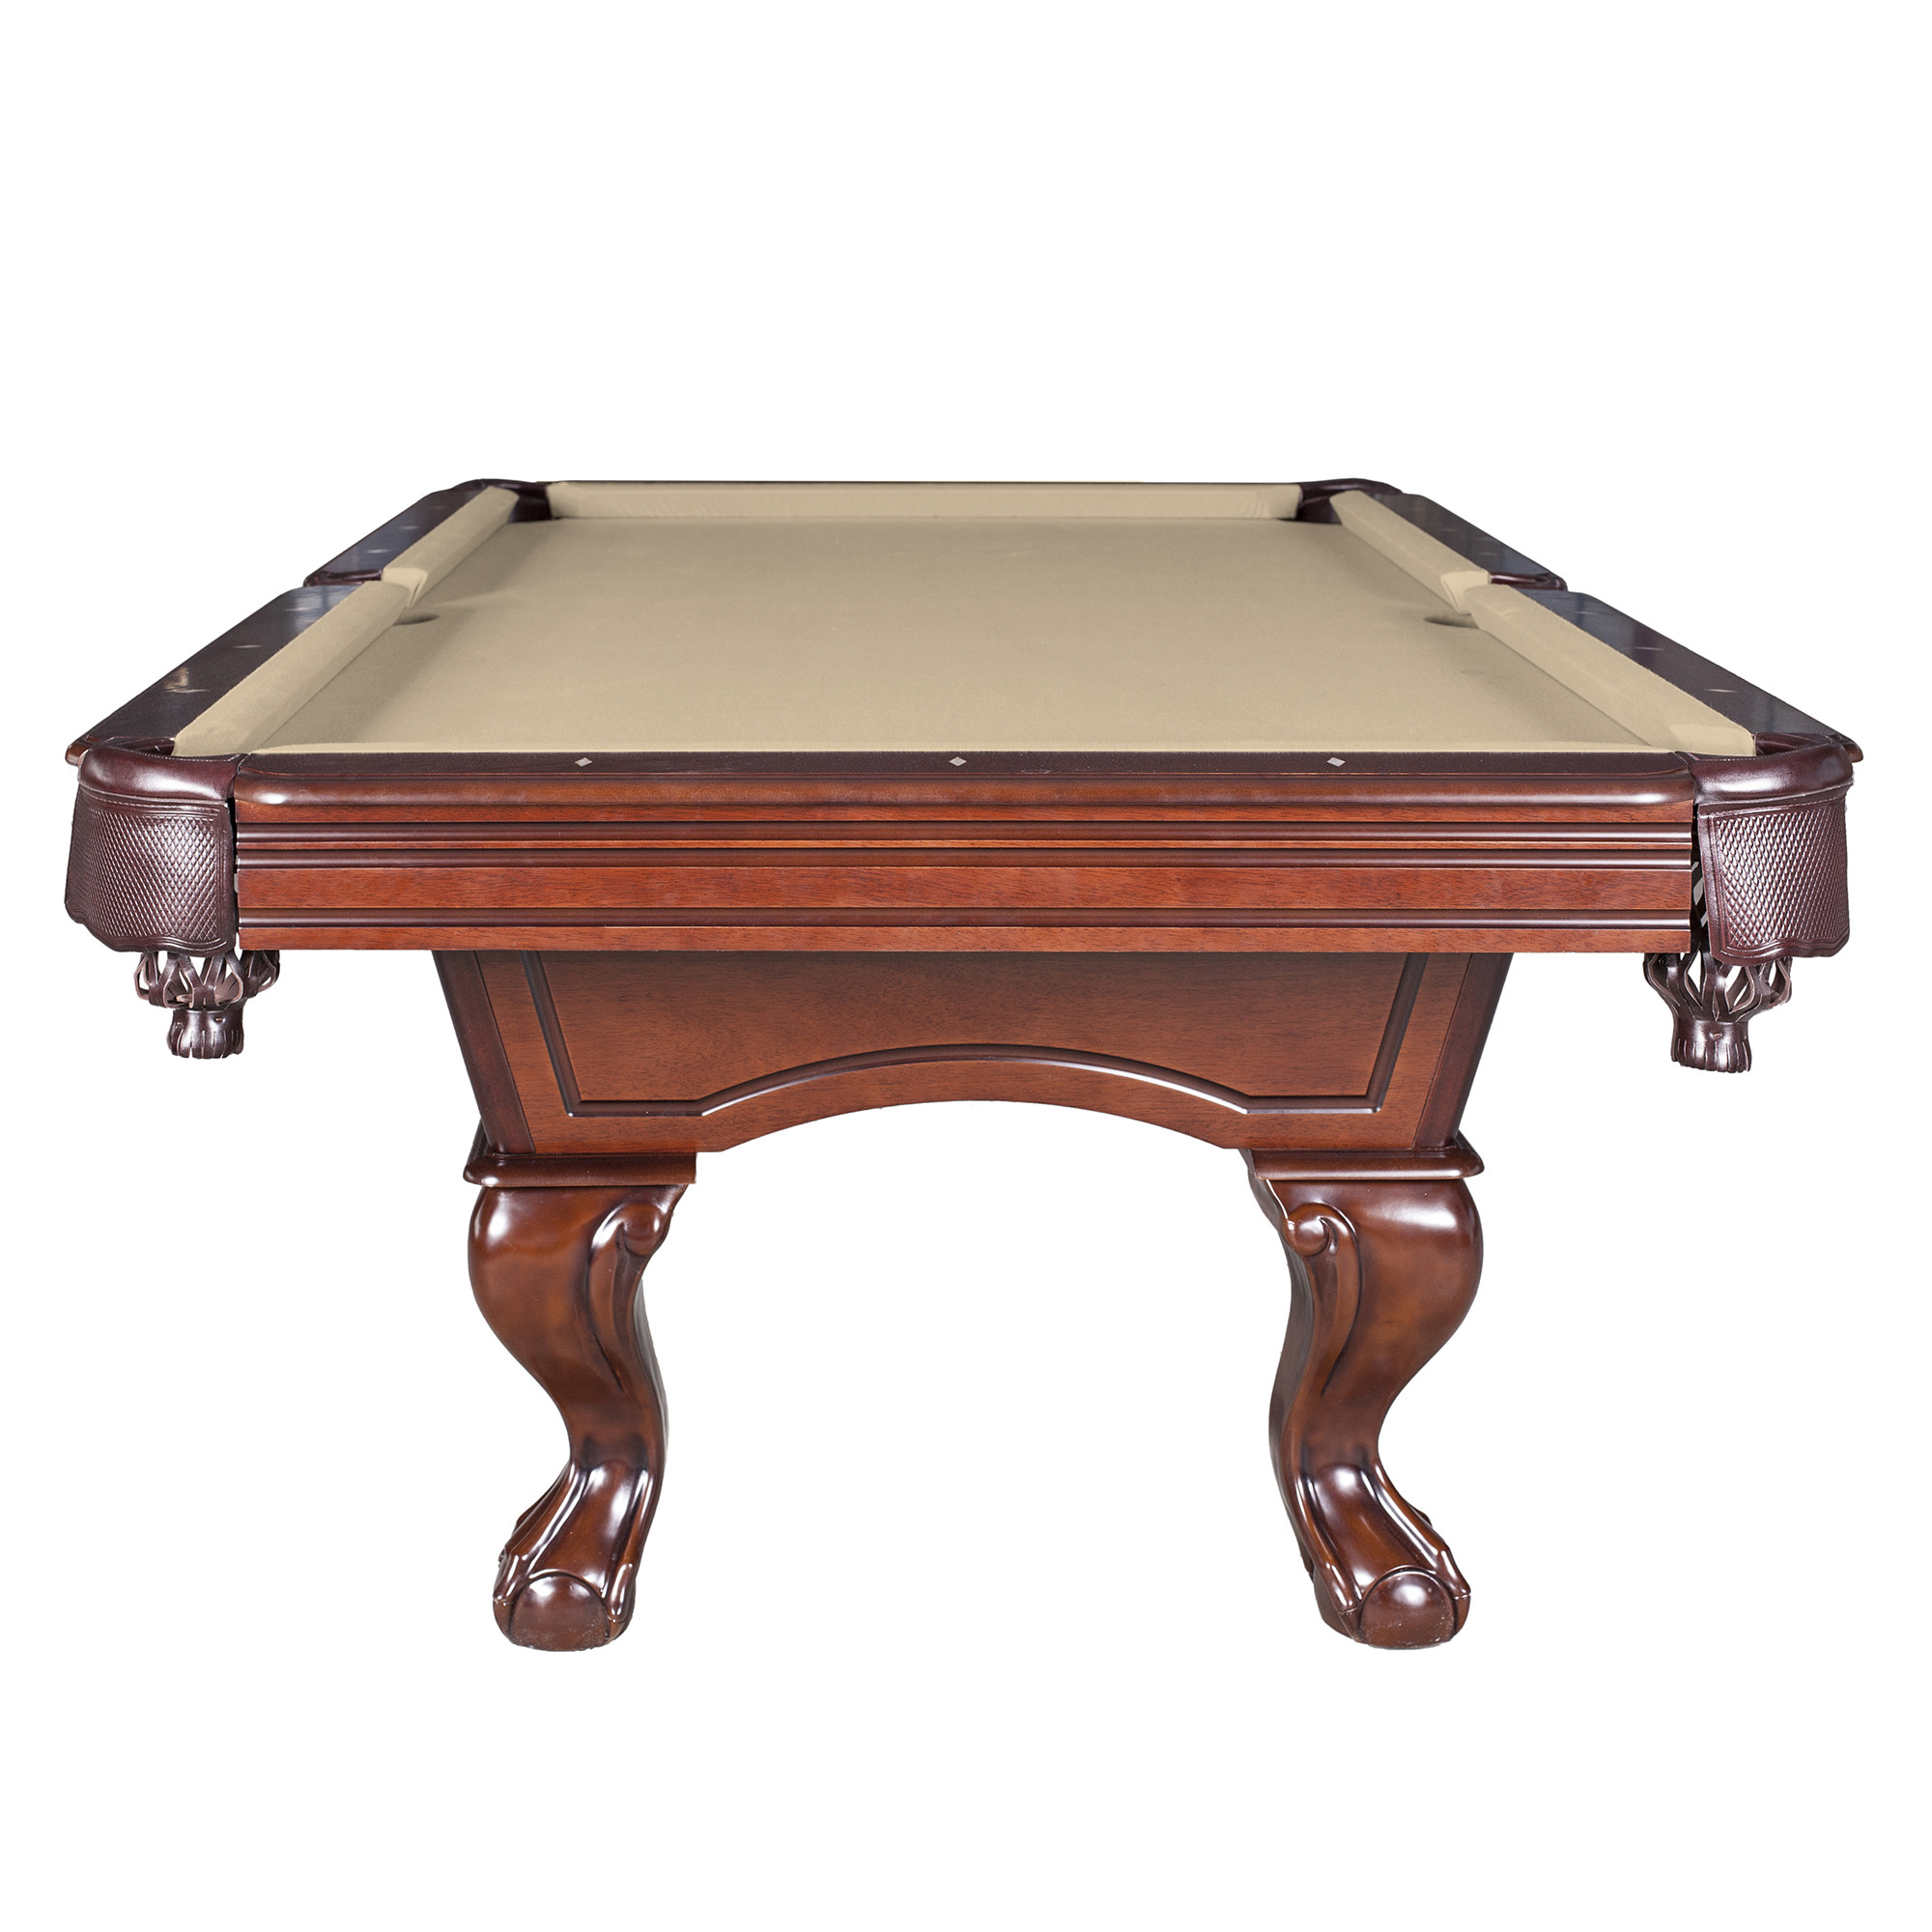 Hathaway Augusta 8 ft. Non-Slate Pool Table - Walnut Finish, 100.5-in l x 55-in w, Camel Felt - image 3 of 14